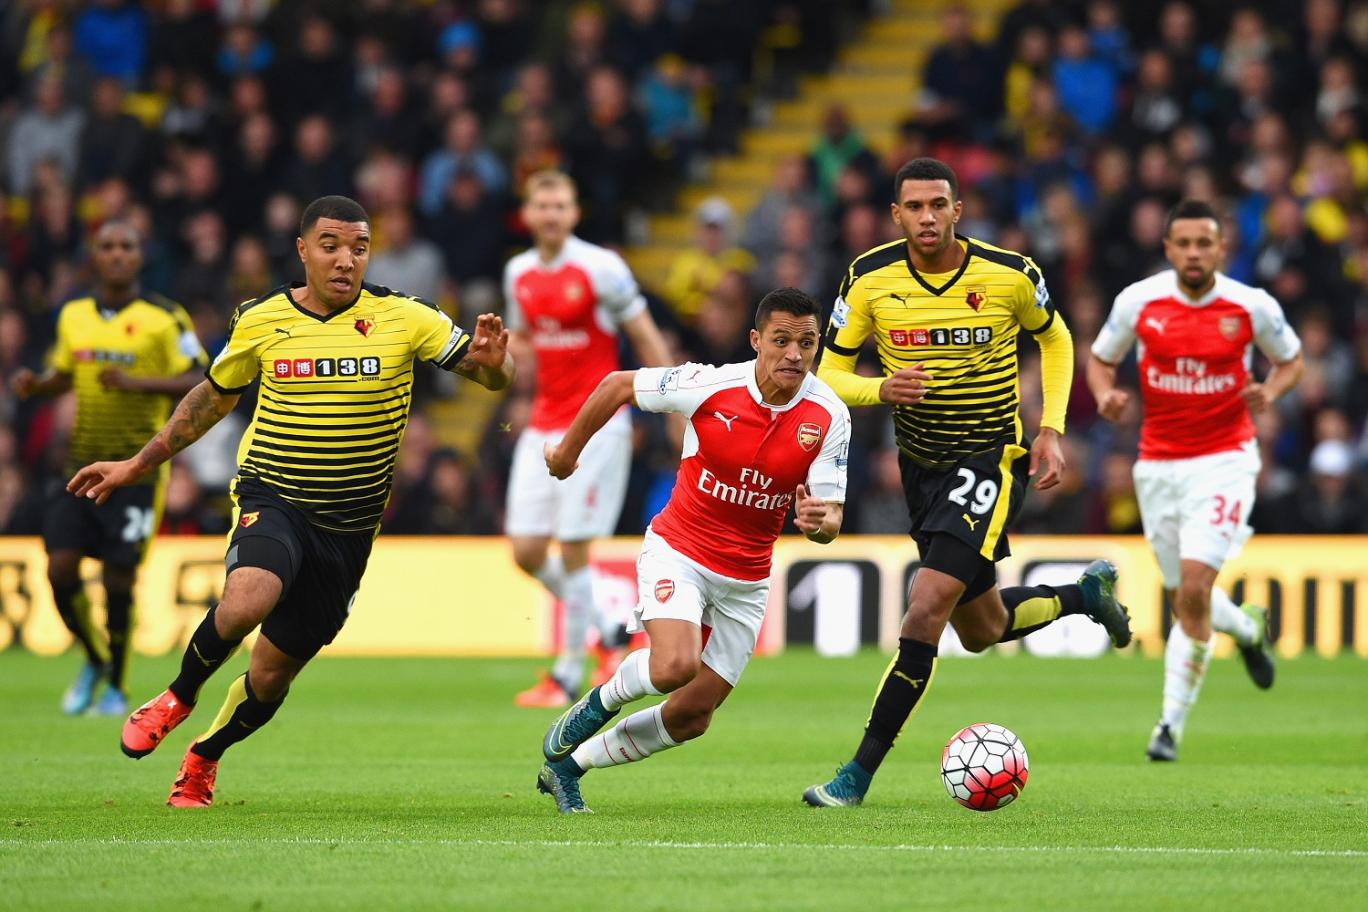 Can Watford deal another blow to Wenger and Arsenal?